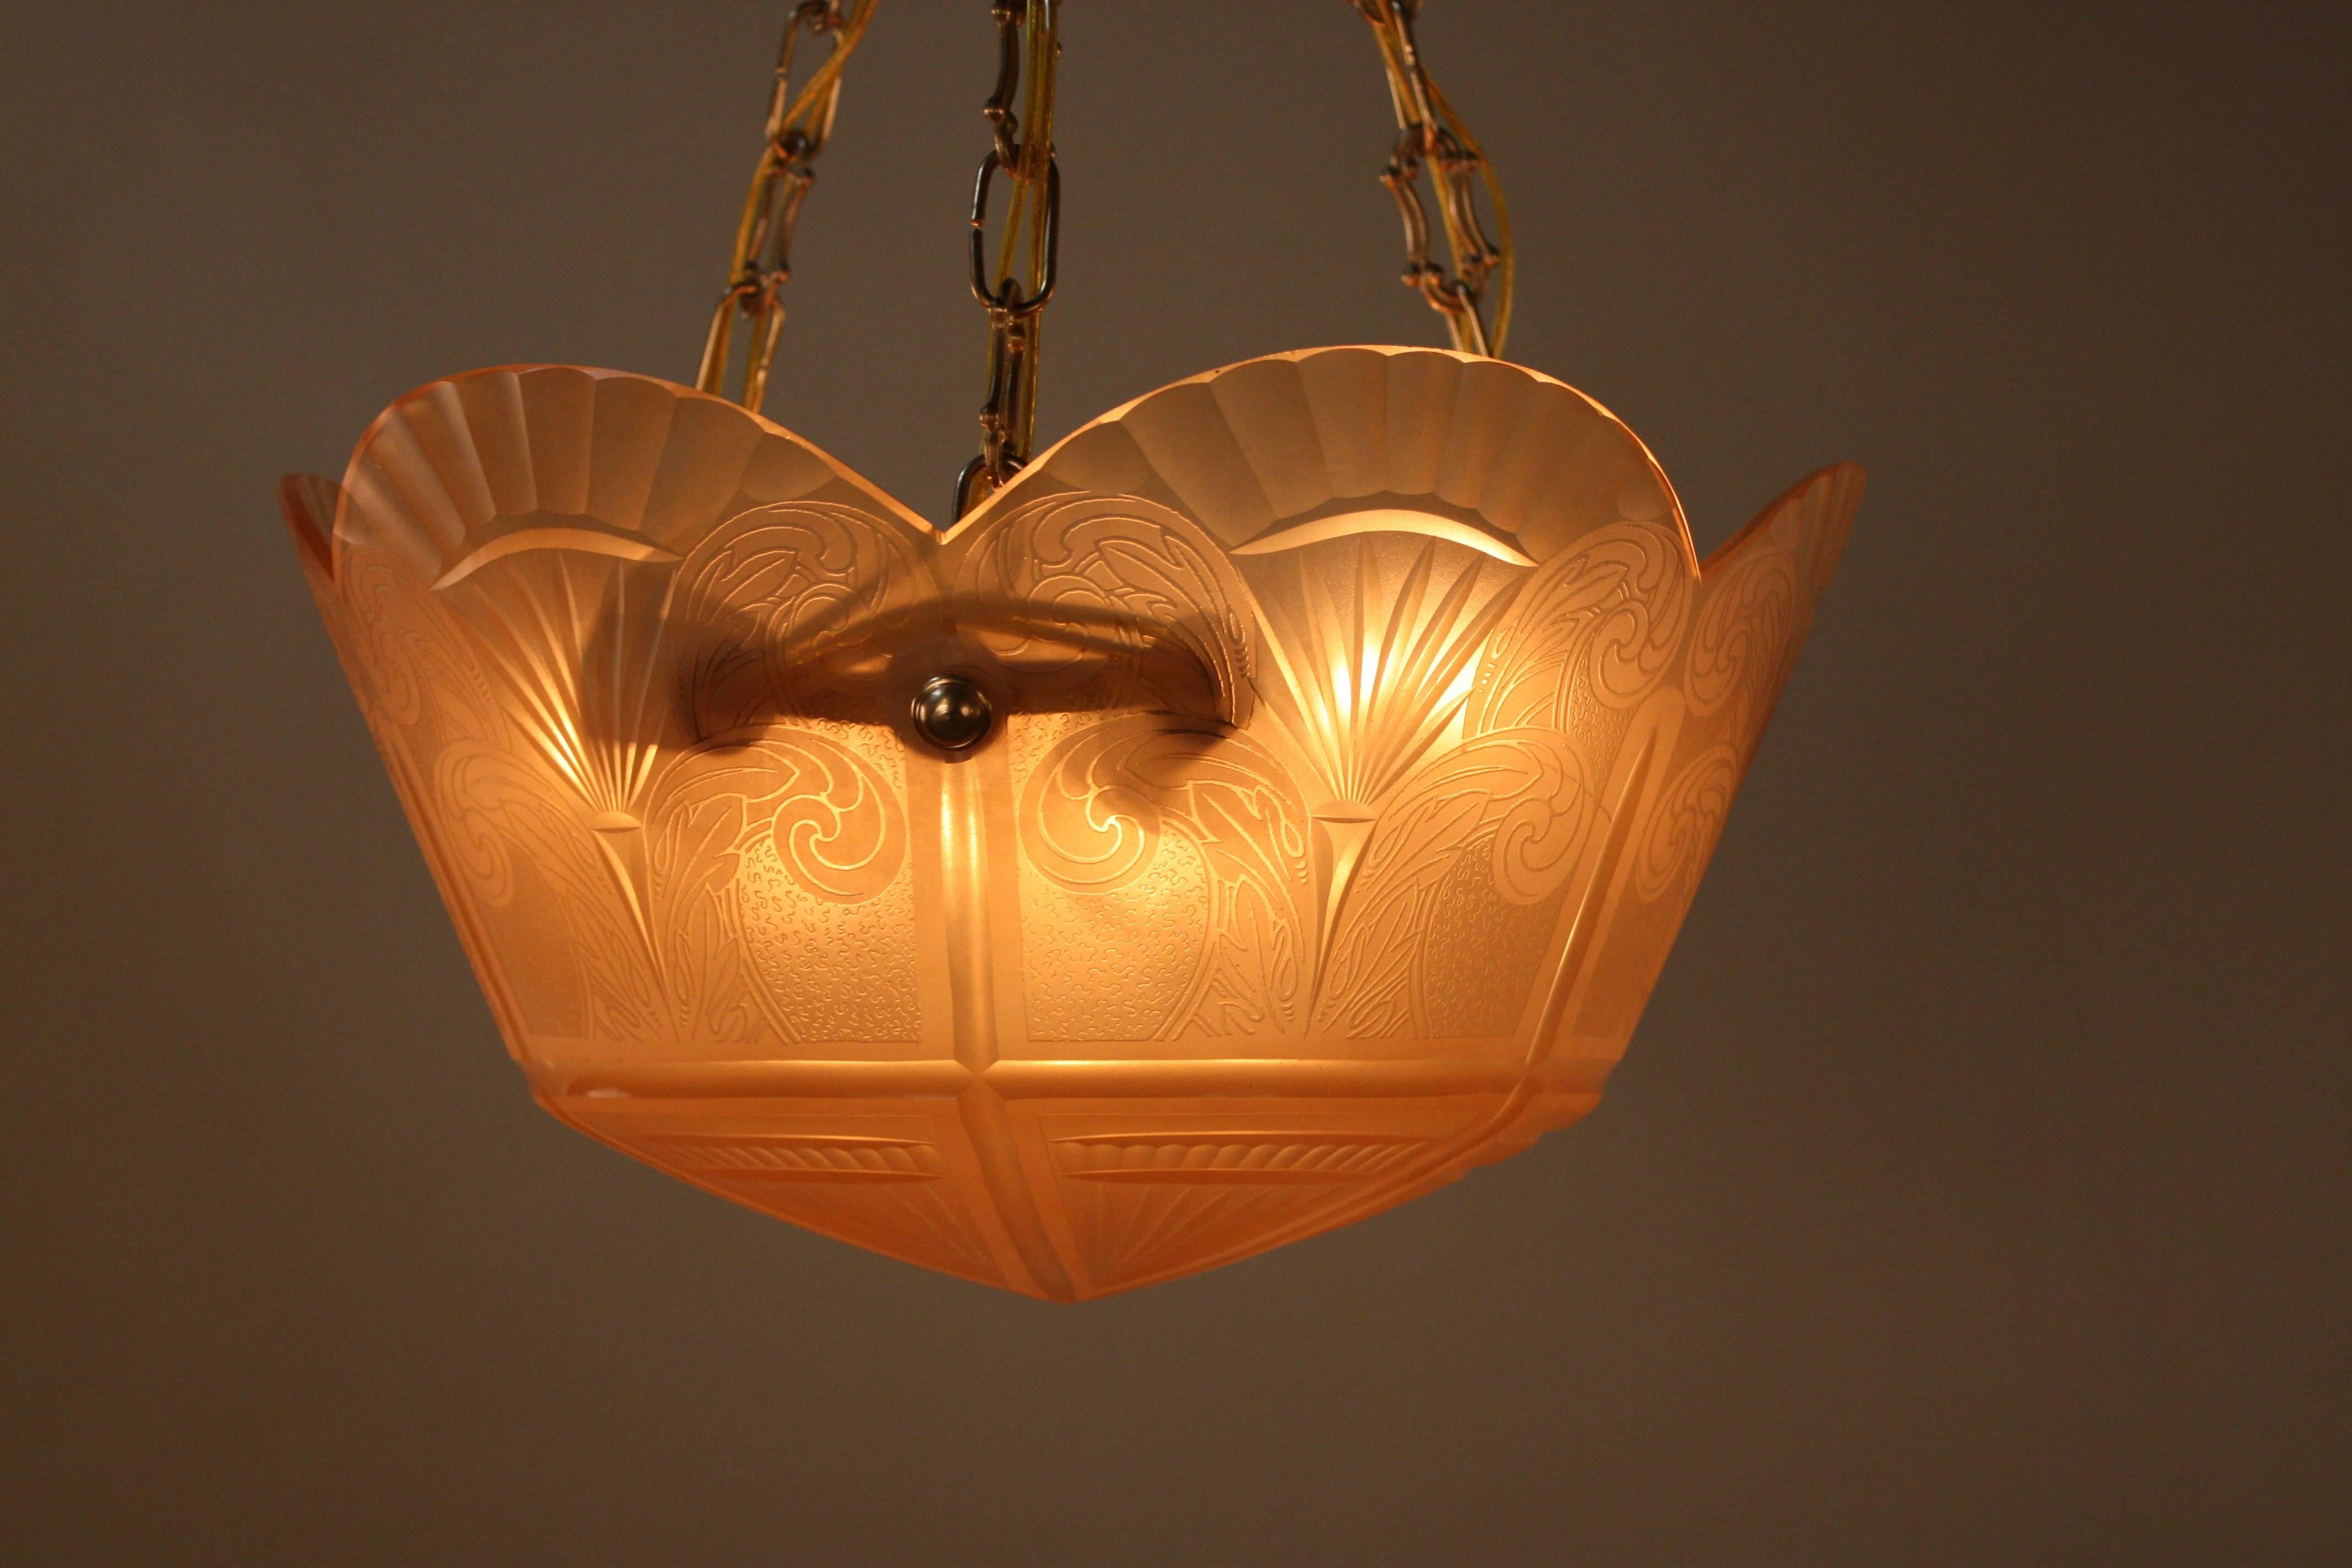 Combination of etched and cut-glass in peach color chandelier with bronze hardware.
Six lights, 60watts each.